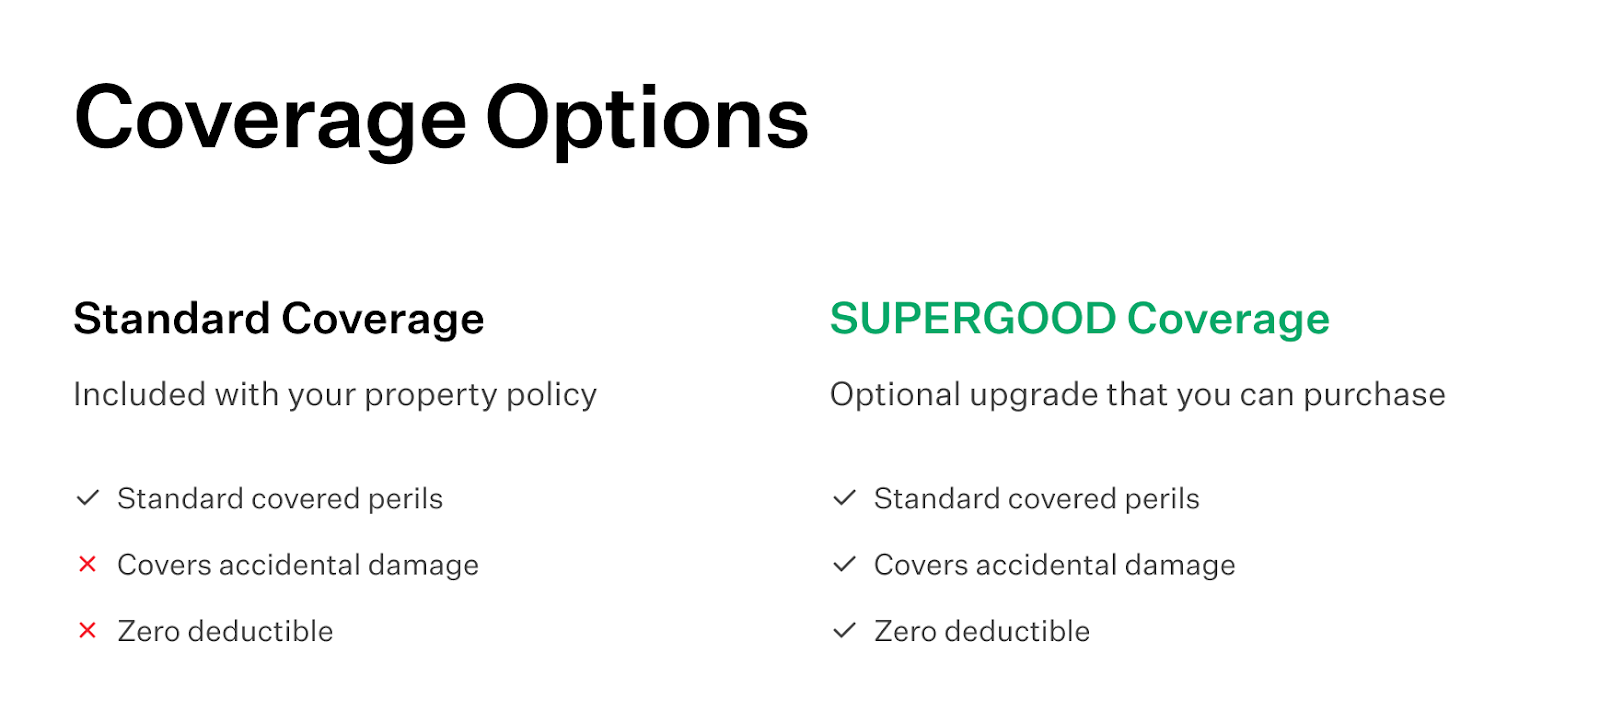 Goodcover’s coverage options: Standard and SUPERGOOD.